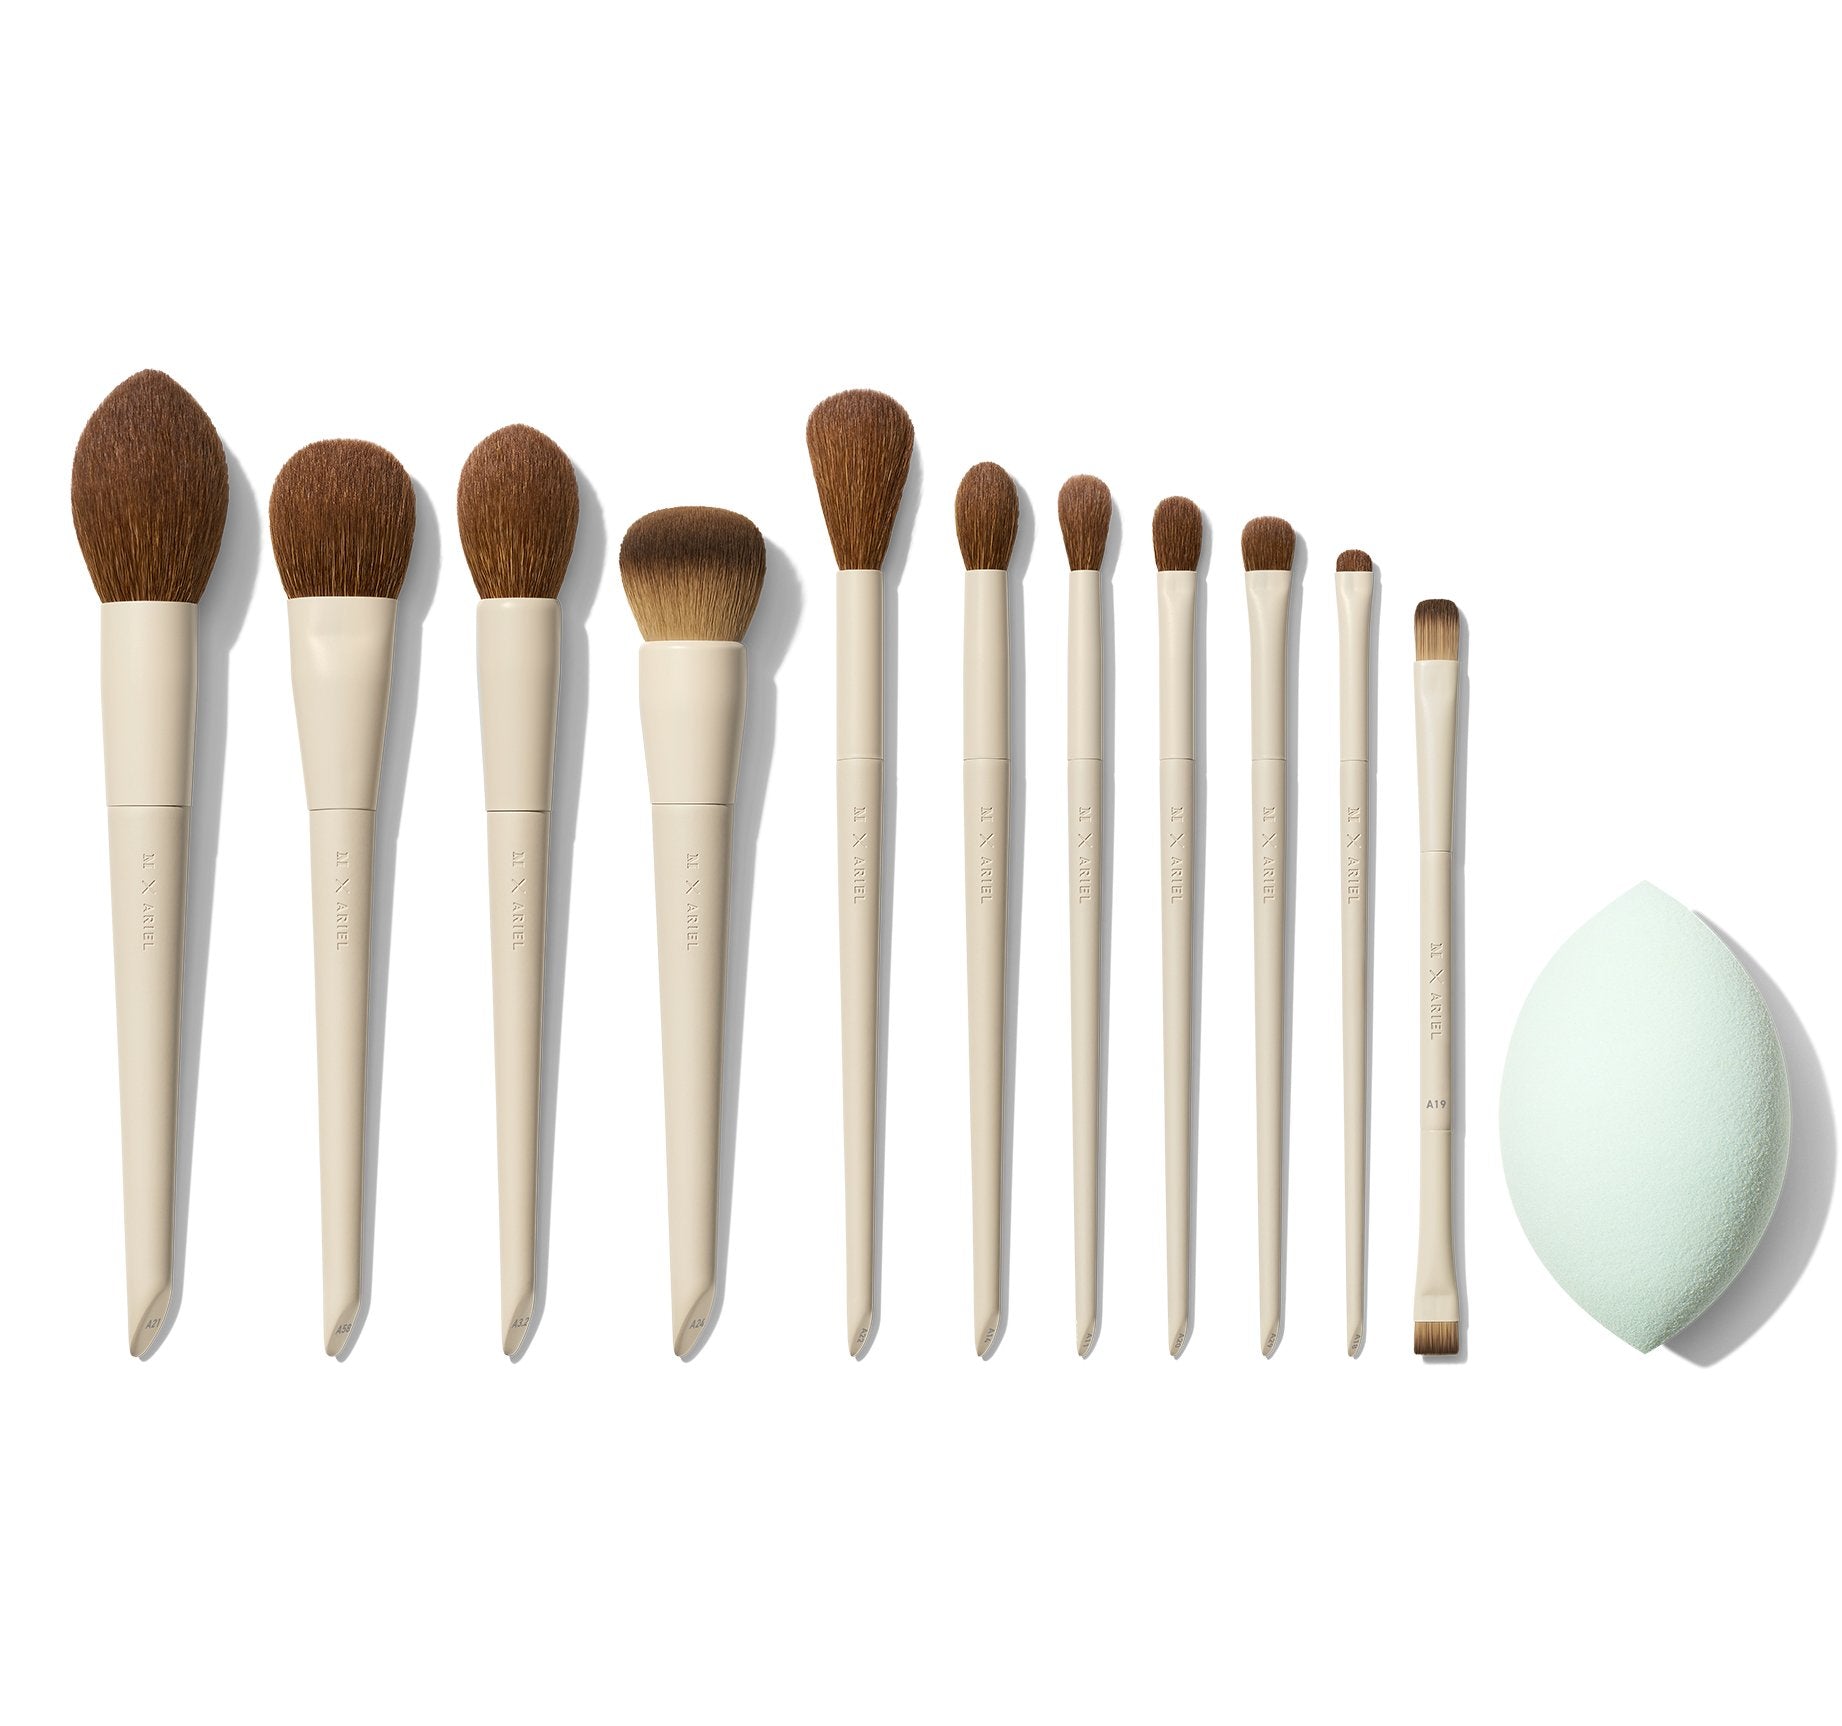 MAKE's Complexion Makeup Brush Guide - MAKE Beauty